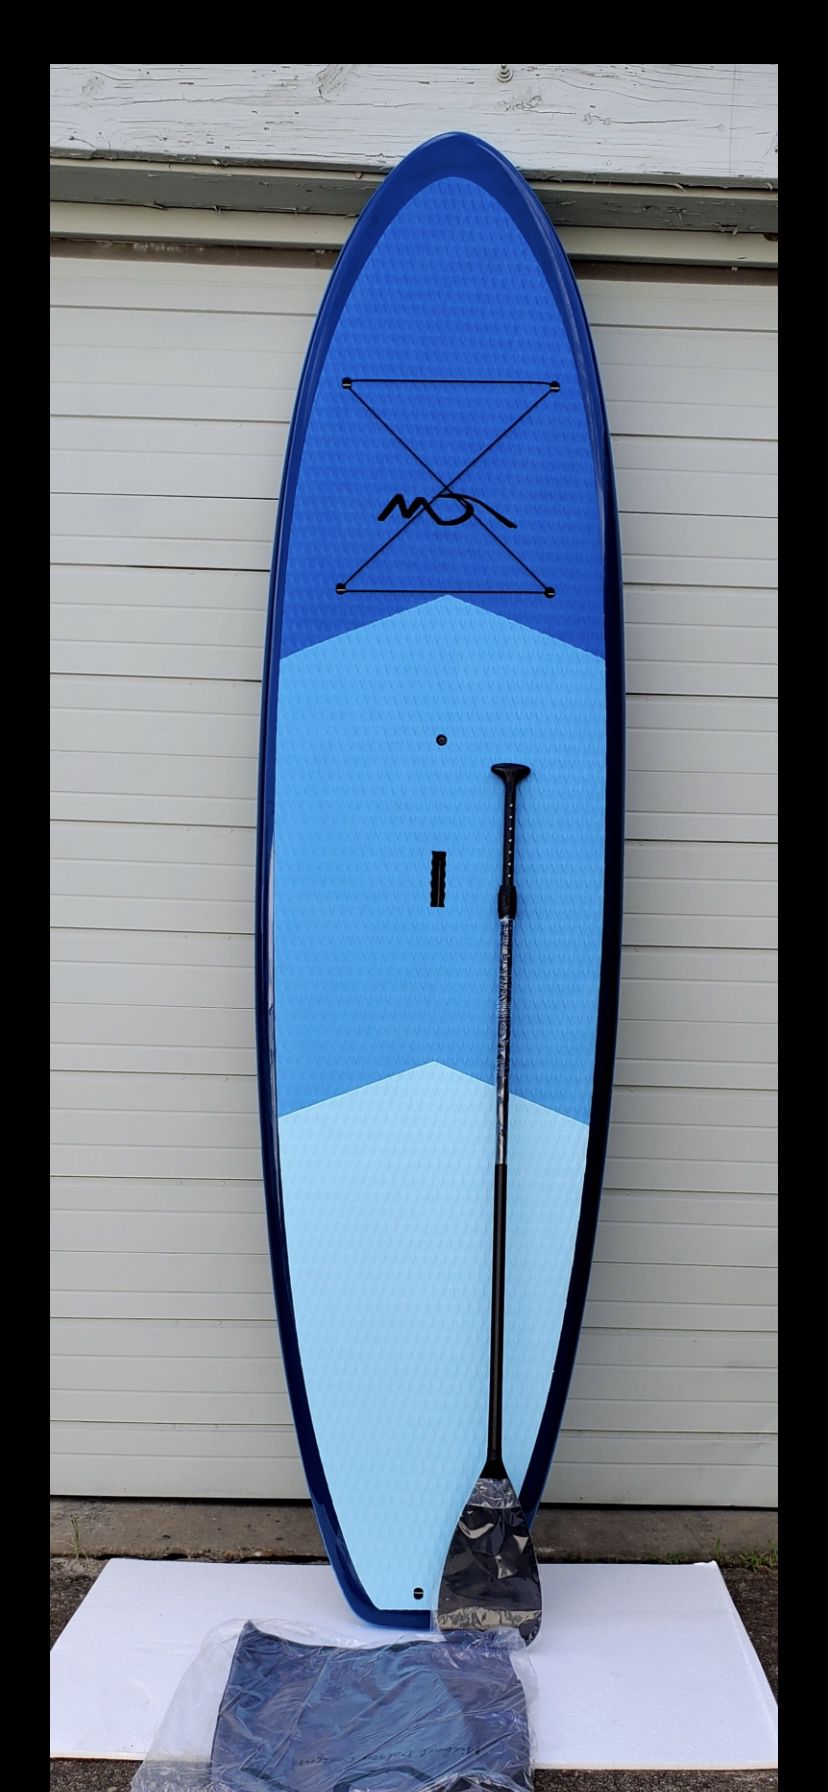 New 10’6 Stand Up Paddleboard with fins and paddle!